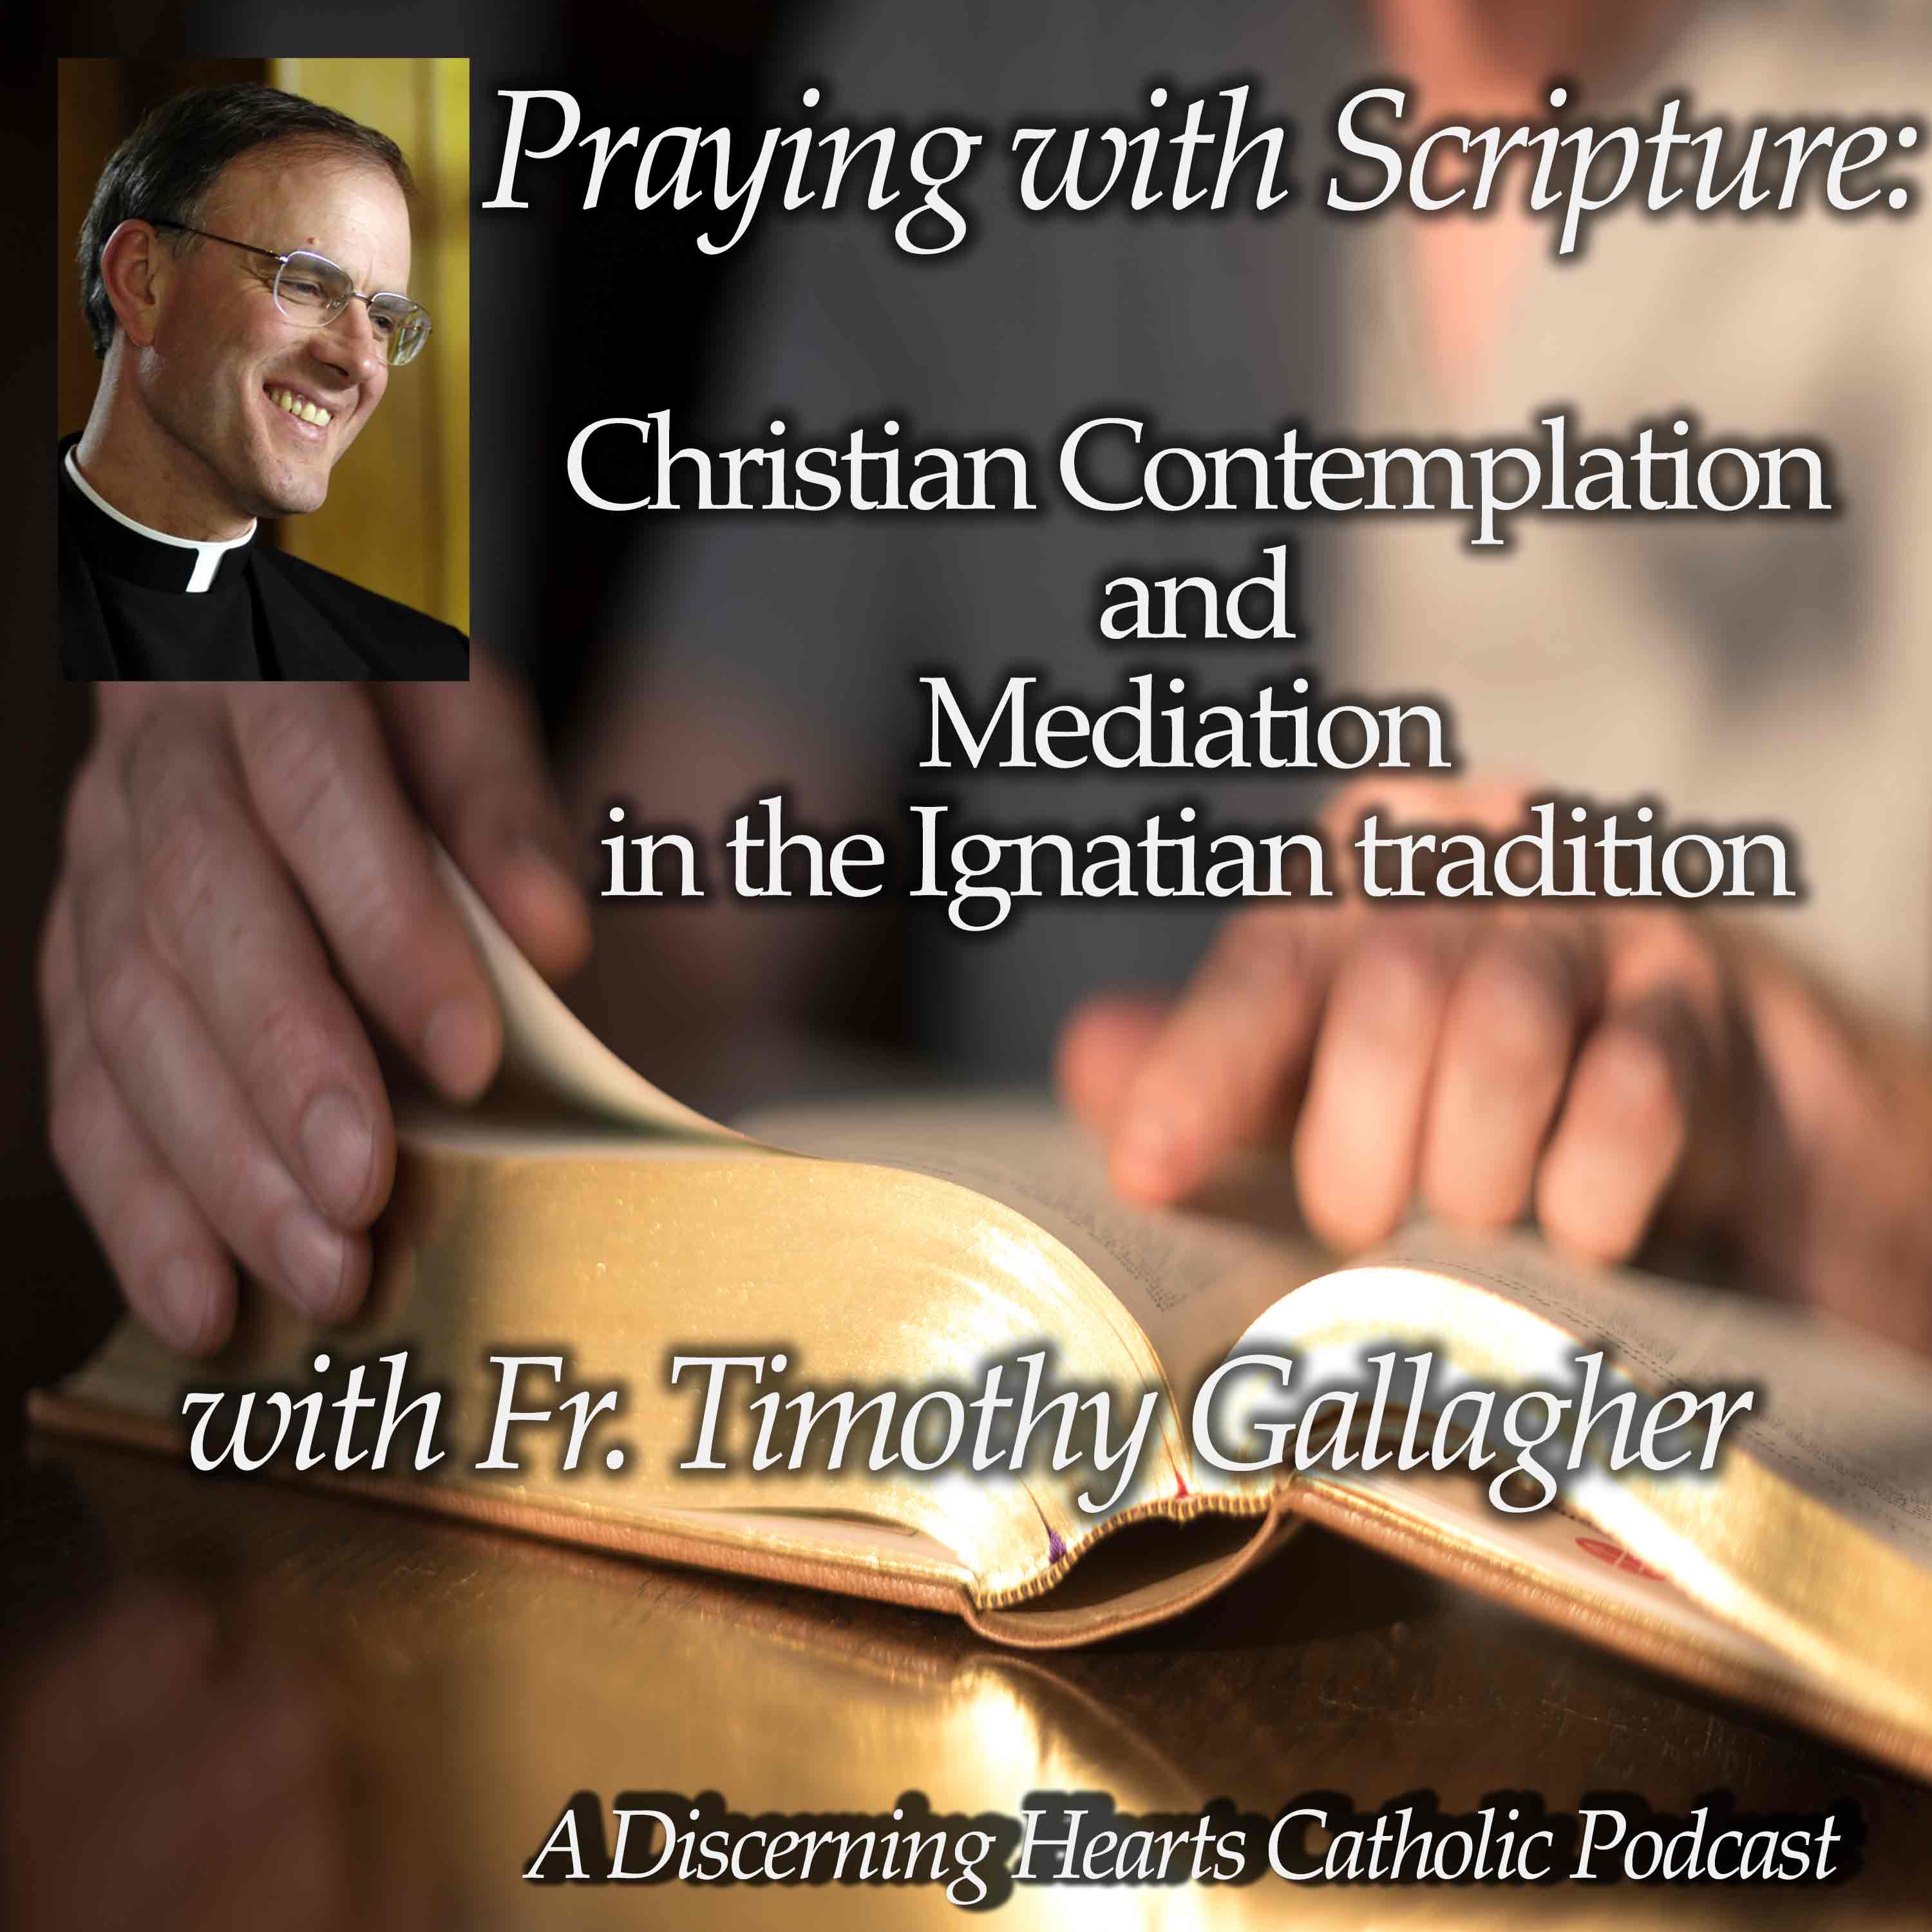 Praying with Scripture: Christian Contemplation and Meditation in the Ignation Tradition with Fr. Ti